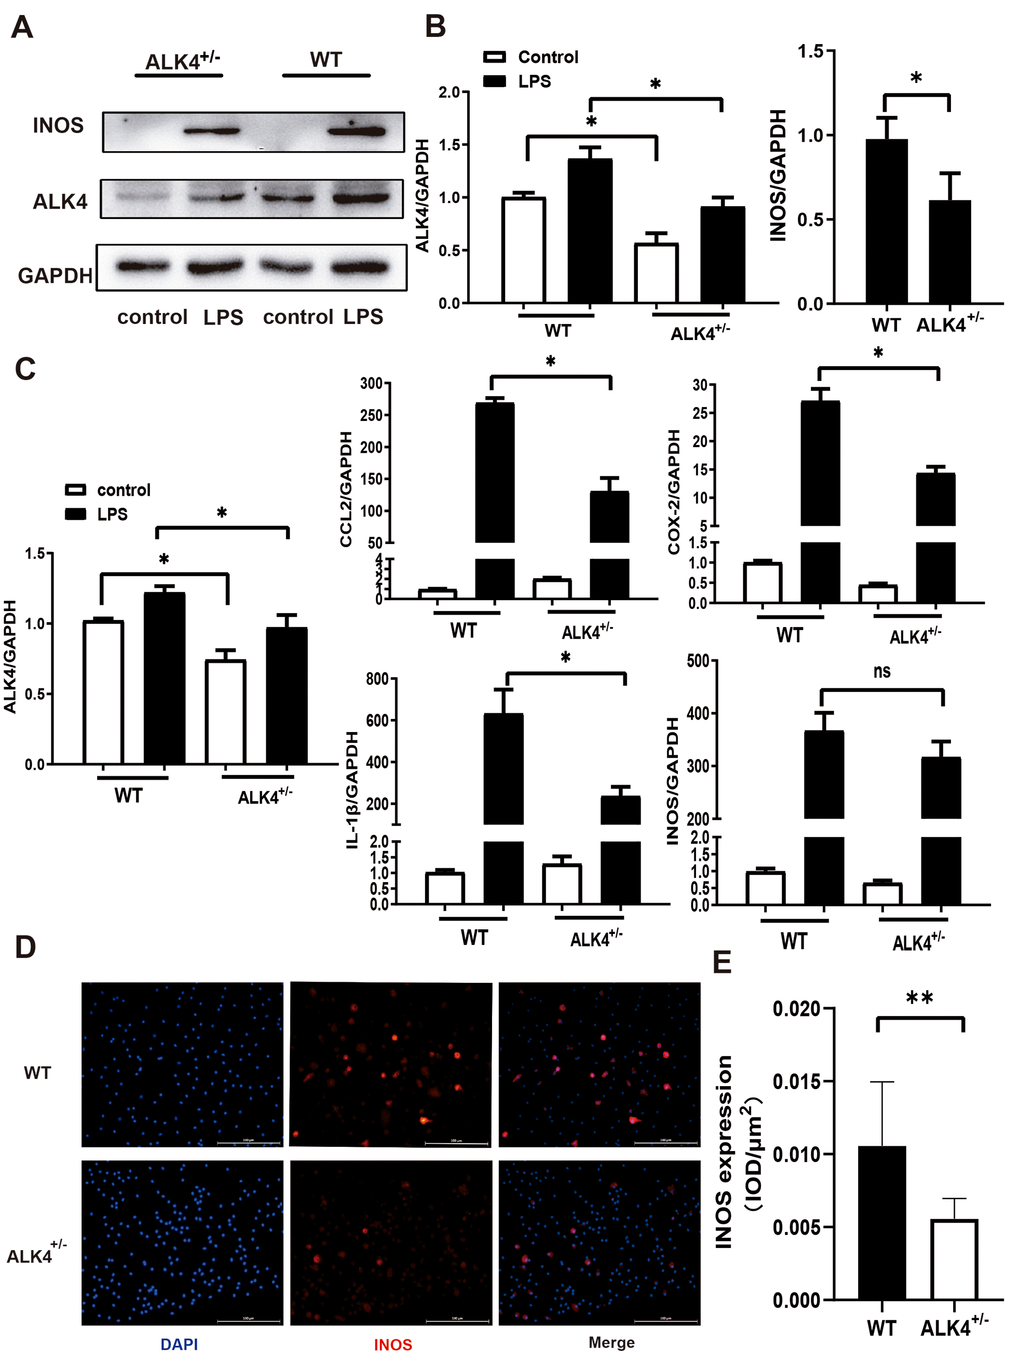 ALK4 haplodeficency reduces pro-inflammation response. (A, B) ALK4 protein and iNOS expression in BMDM from WT and ALK4+/- mice in 4 groups (n=4 for each). (C) The mRNA expression of ALK4, iNOS, CCL2, IL-1β and COX-2 were detected in 4 groups (n=4 for each). (D, E) iNOS expression in LPS-stimulation BMDM from WT and ALK4+/- mice in immunofluorescence. * p